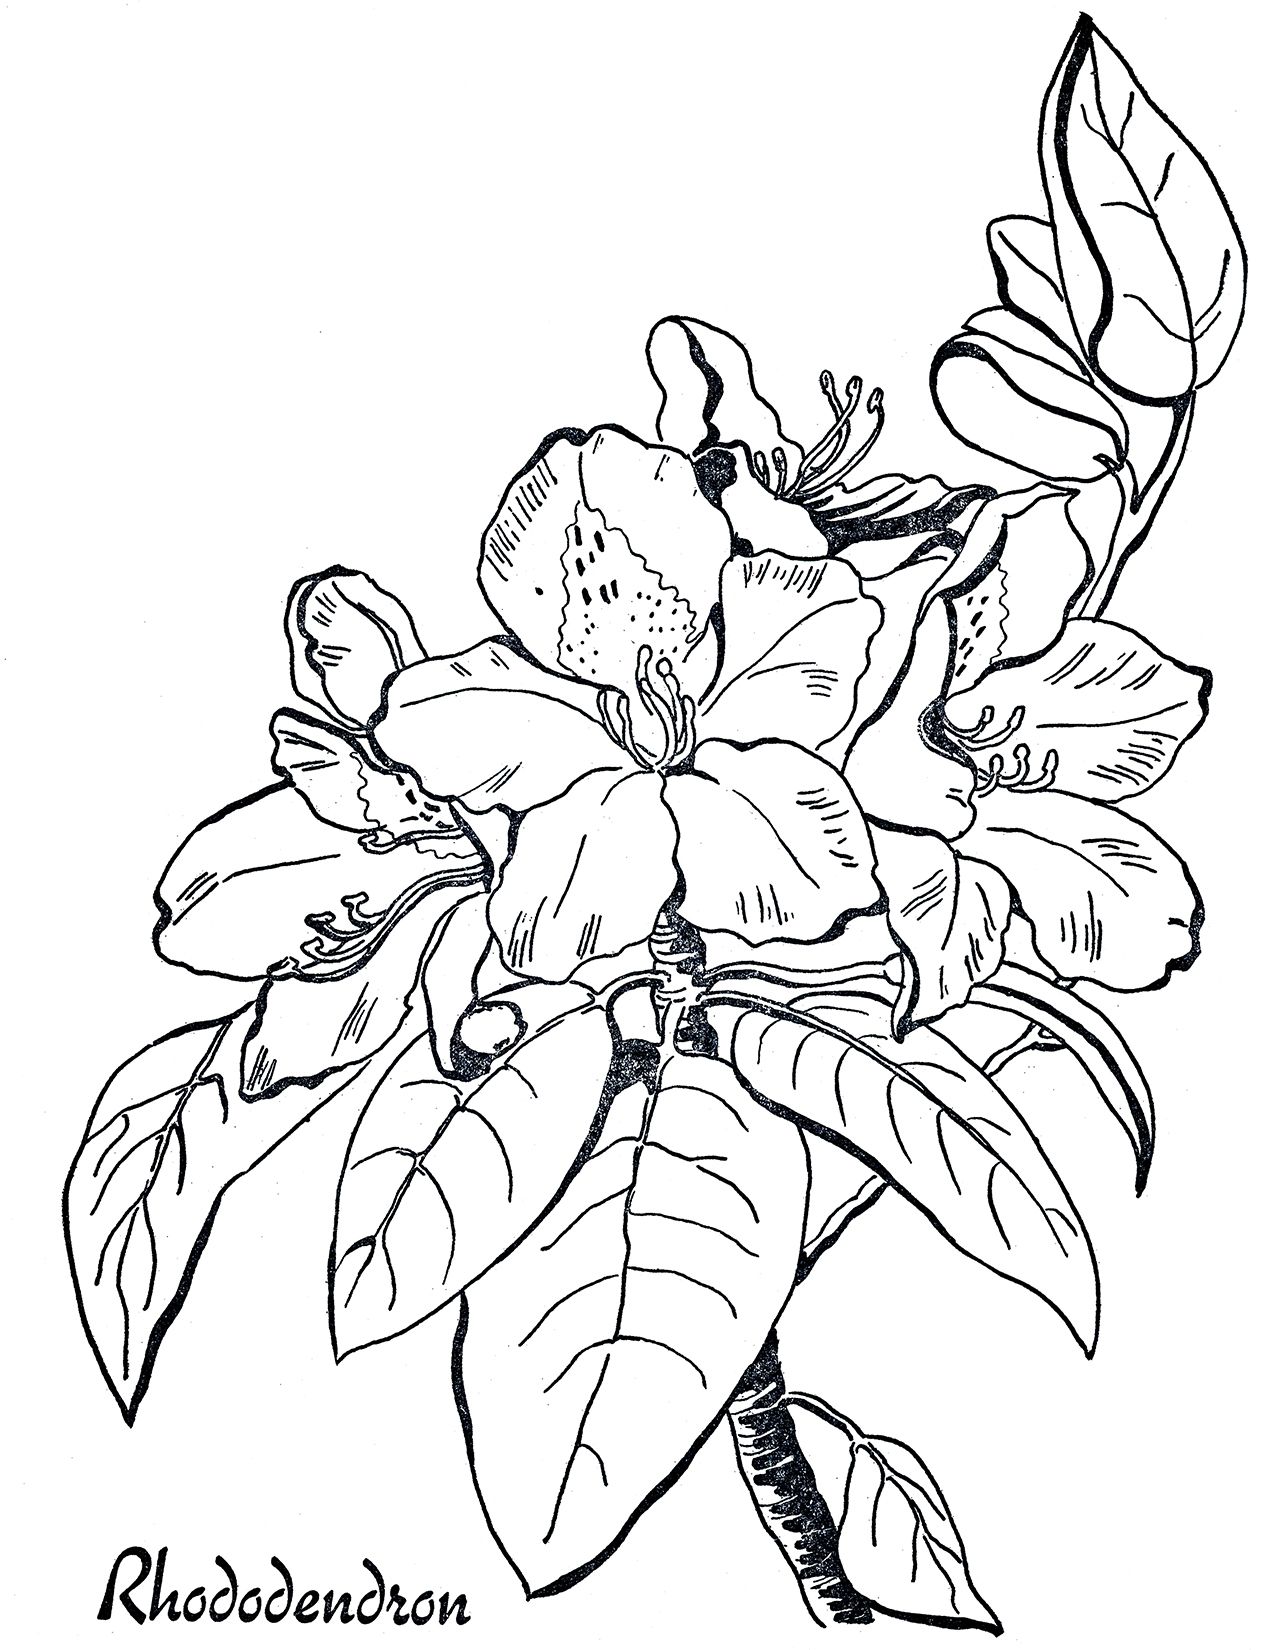 Rhododendron Flower Drawing